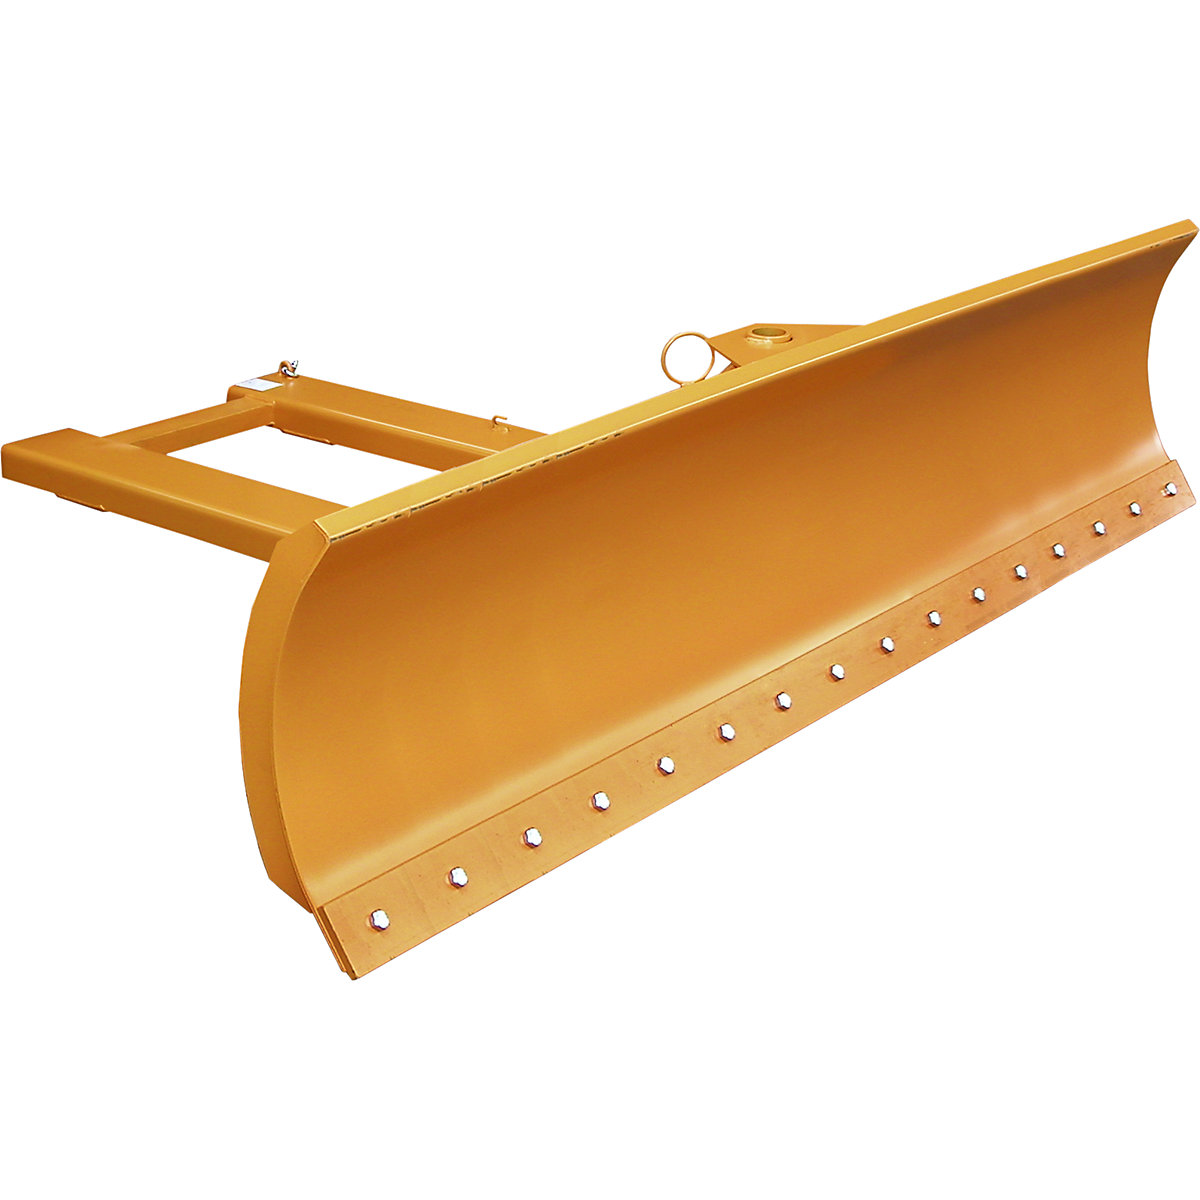 Snow plough for forklifts – eurokraft pro, with steel scraping edge, blade width 2400 mm